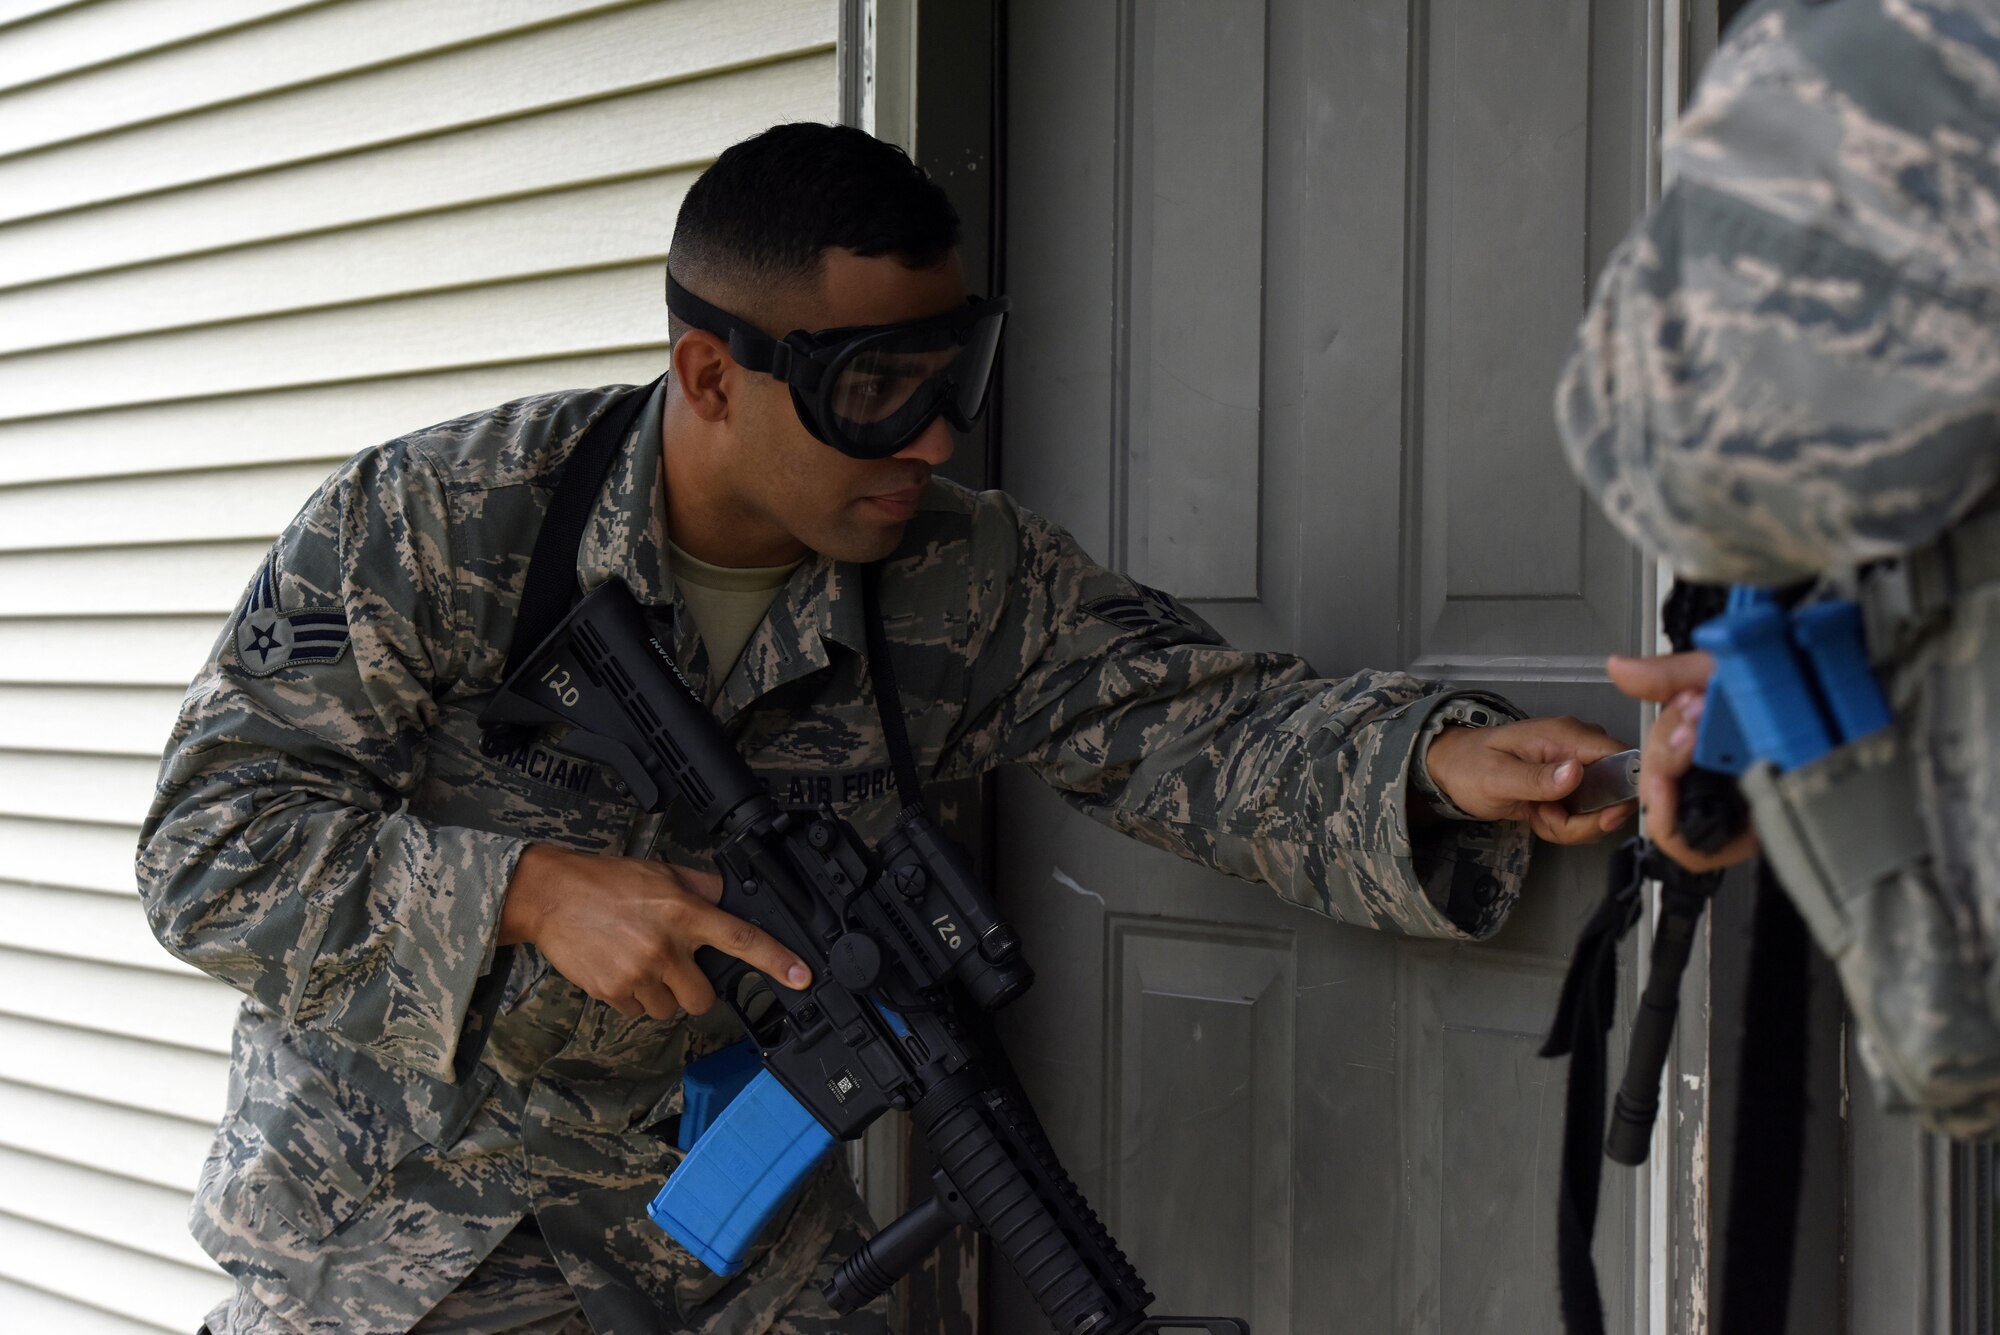 Senior Airman Xavier Graciana, a security forces specialist with the 180th Fighter Wing in Swanton, Ohio, prepares to breach a house during urban combat training Oct. 1, 2016, at the Maumee Police and Fire Training Center in Maumee, Ohio. Security Forces personnel conduct multiple annual training scenarios to maintain a high state of preparedness and readiness in the event of an emergency.